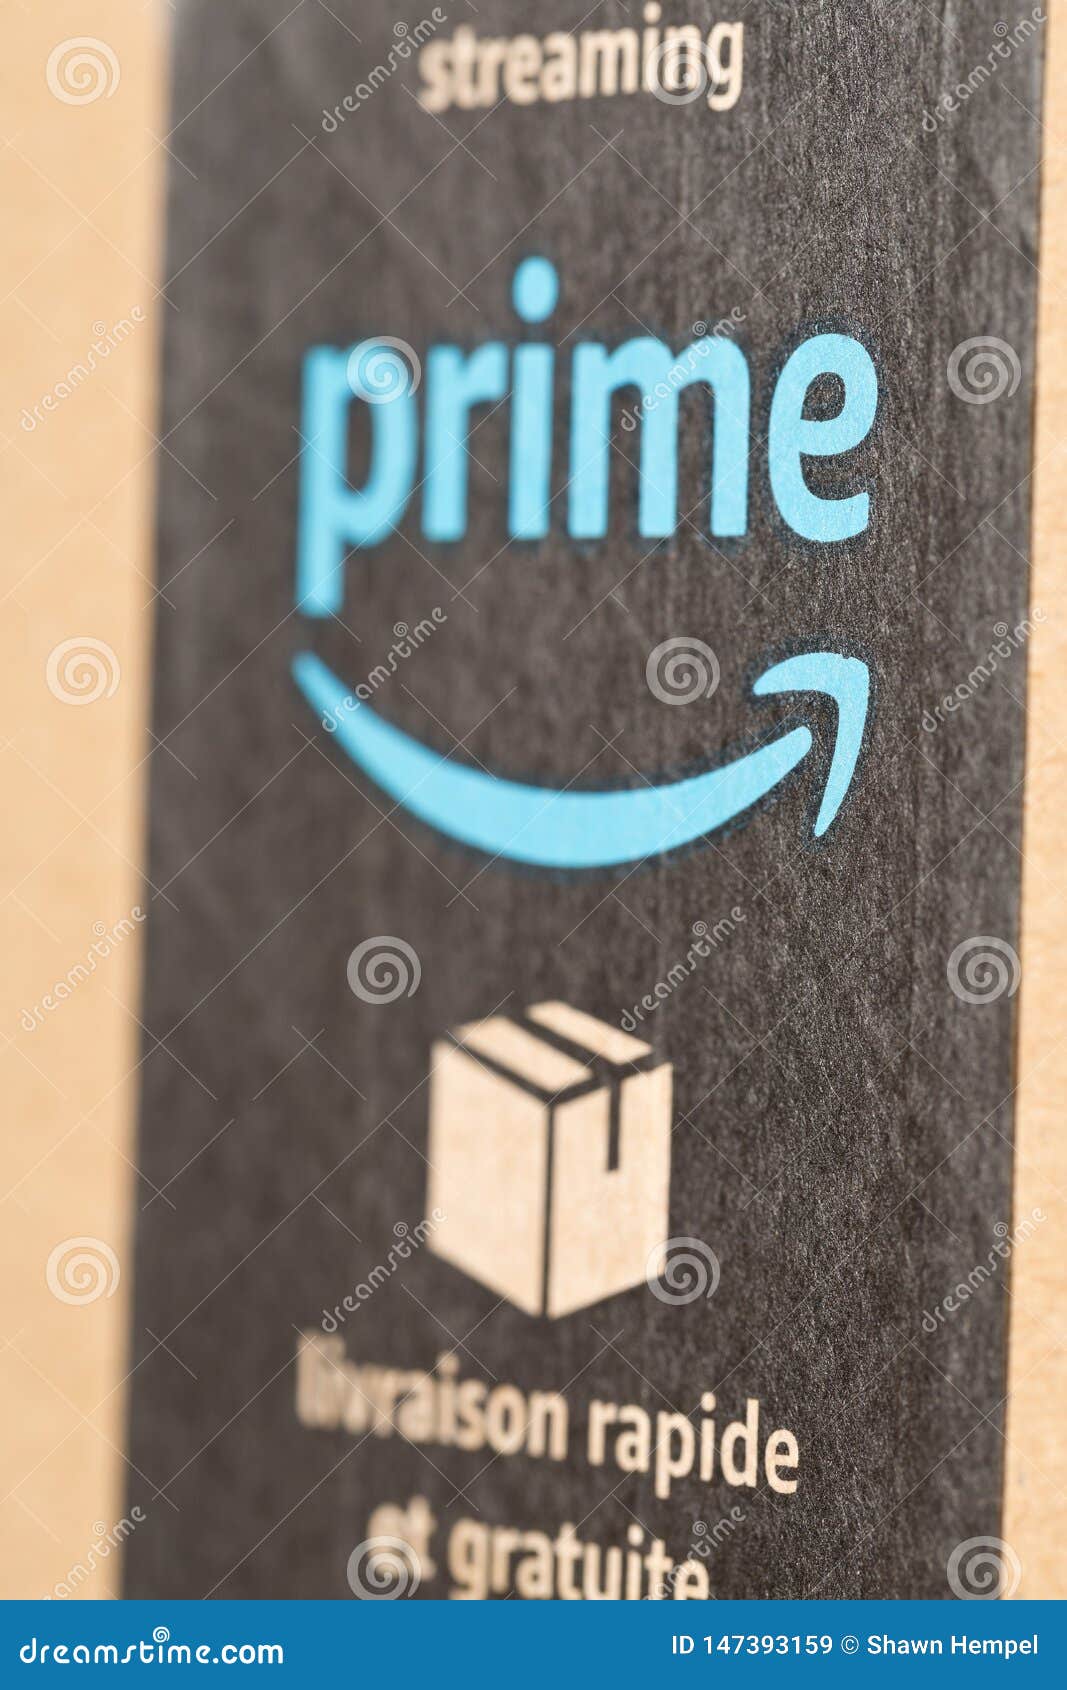 Dresden Germany April 3 19 Stack Of Amazon Prime Parcels Over White Background Editorial Stock Image Image Of Fast Container